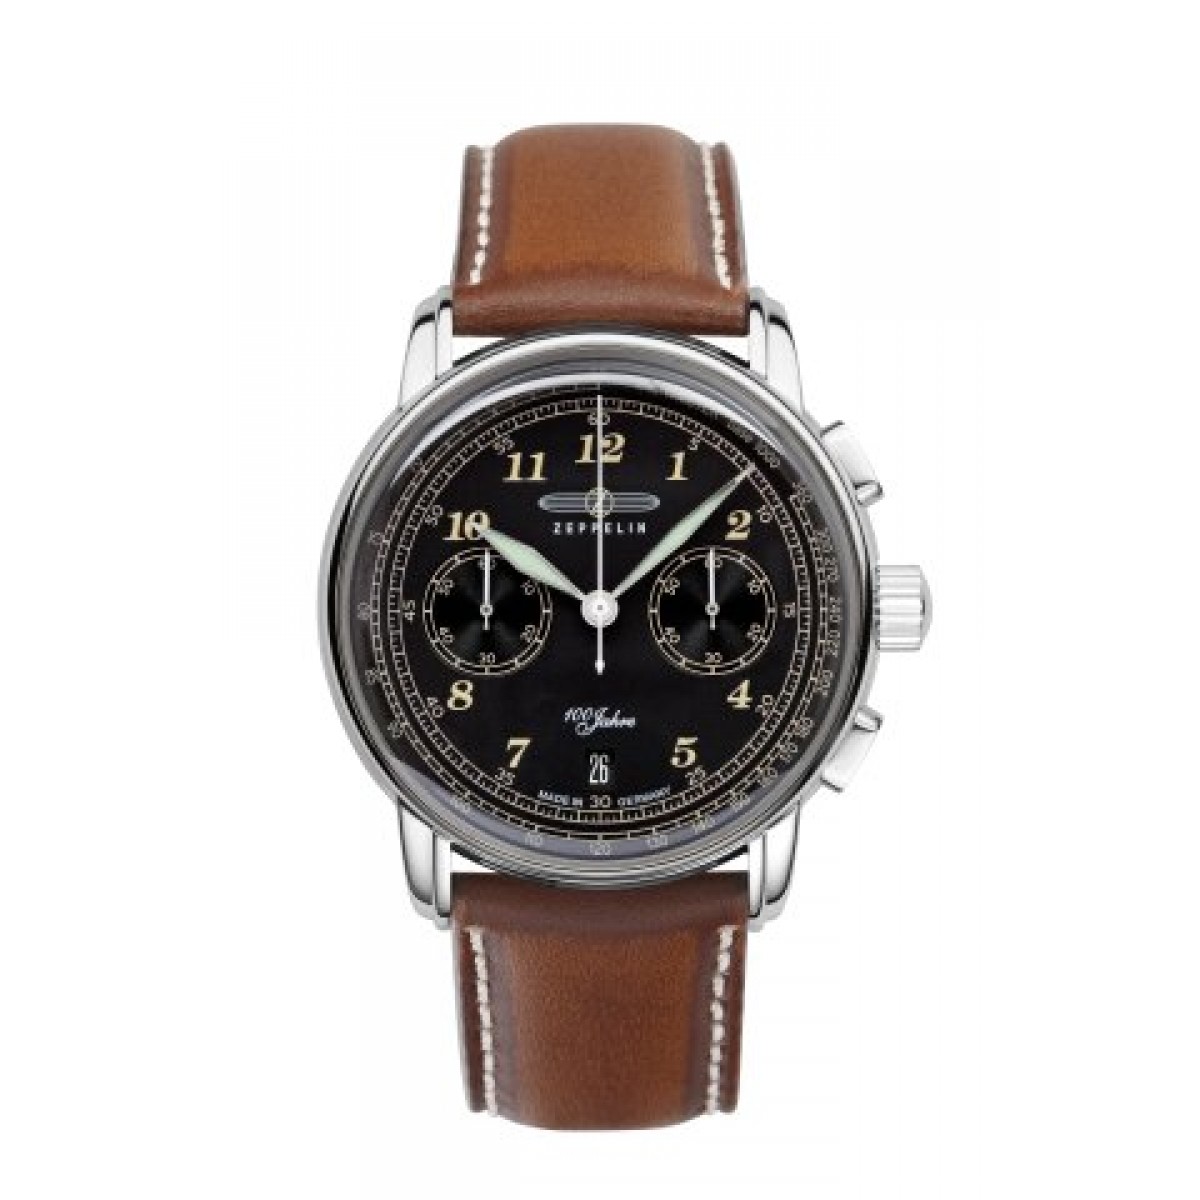 100 Jahre Zeppelin Chronograph with leather strap